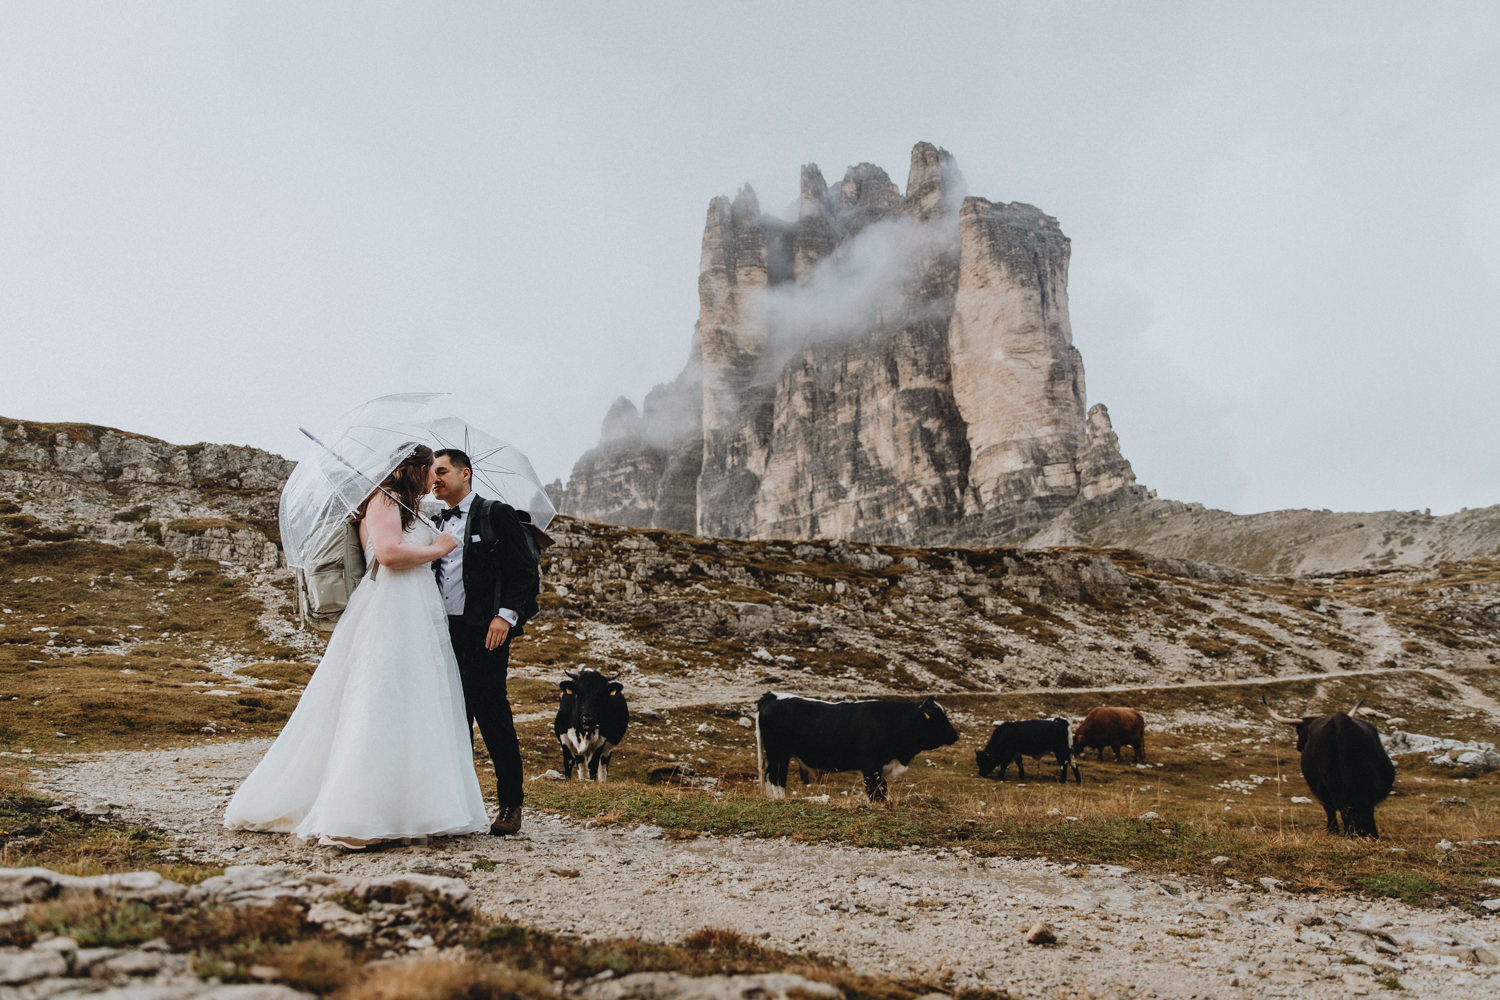 A couple in wedding dress and tuxedo kiss under clear umbrellas. They are eloping in Tre Cime National Park, surrounded by misty mountain peaks and a herd of cows.